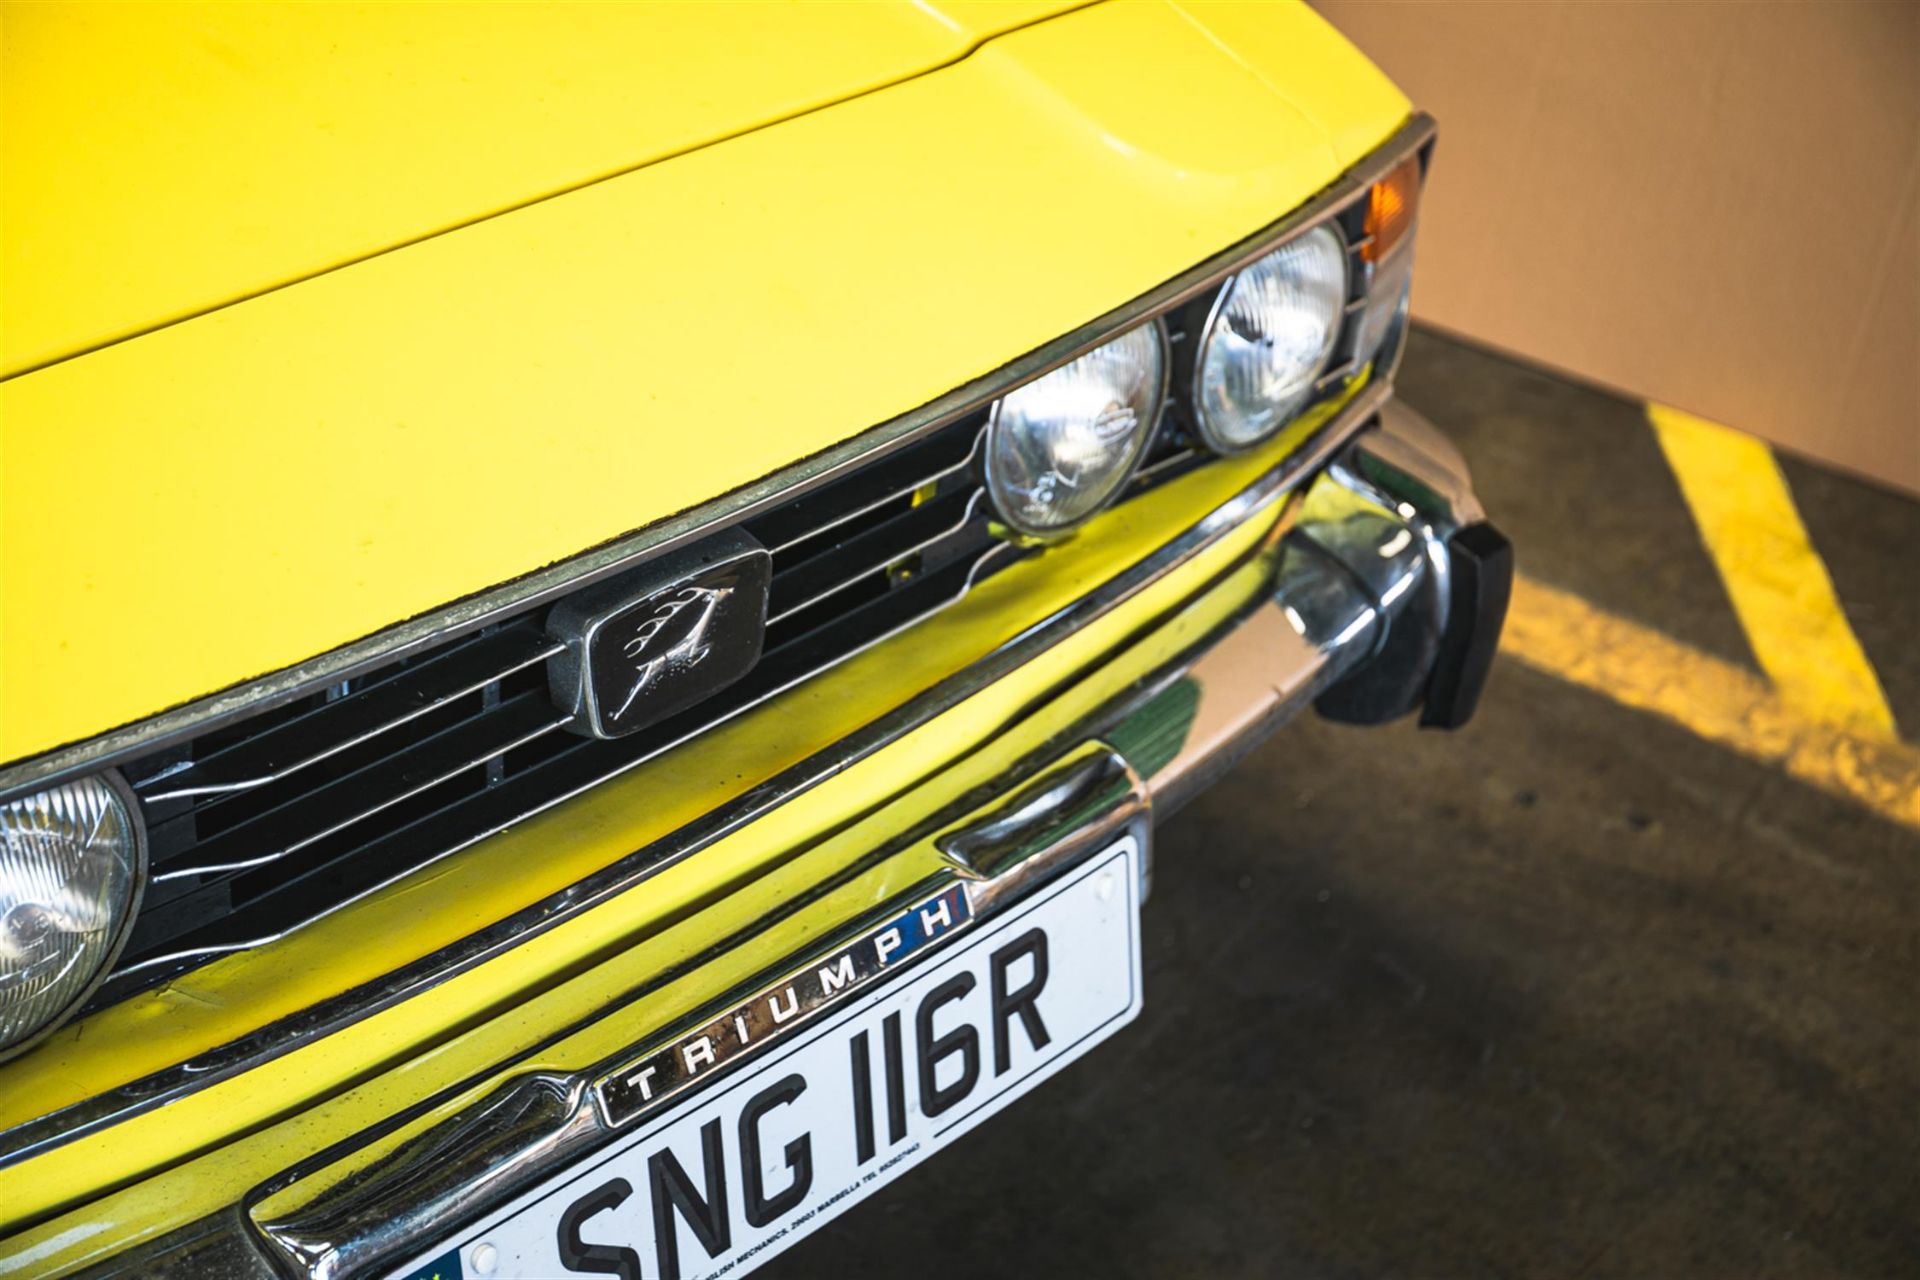 1977 Triumph Stag MKII - Image 6 of 12